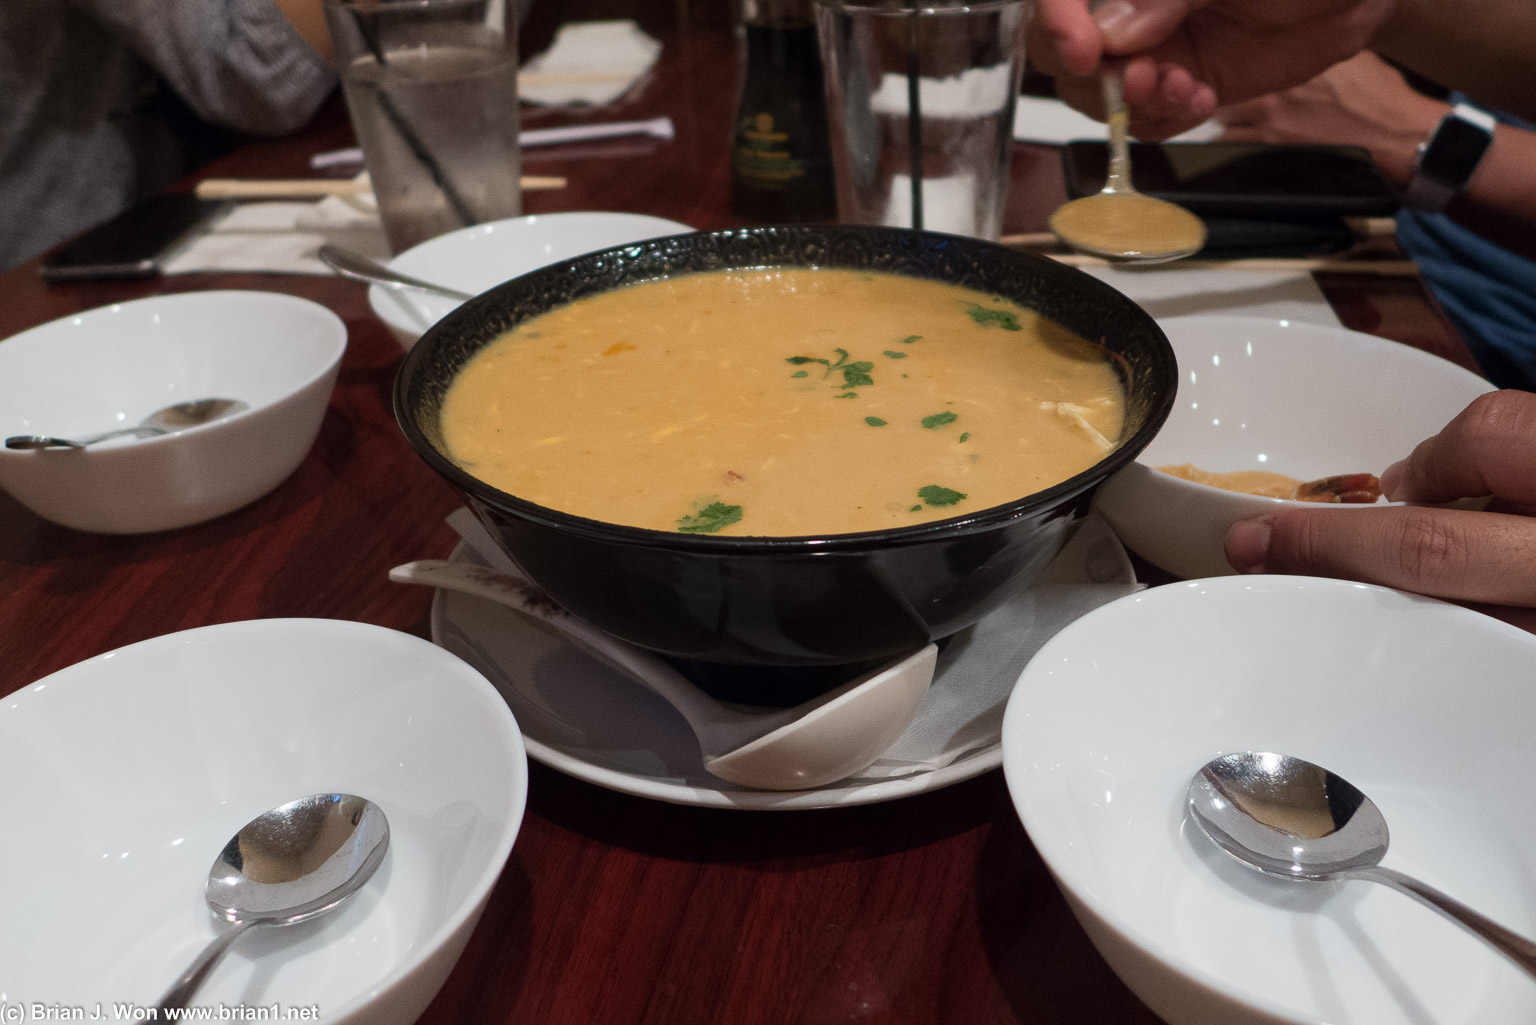 Seafood bisque. Very good.